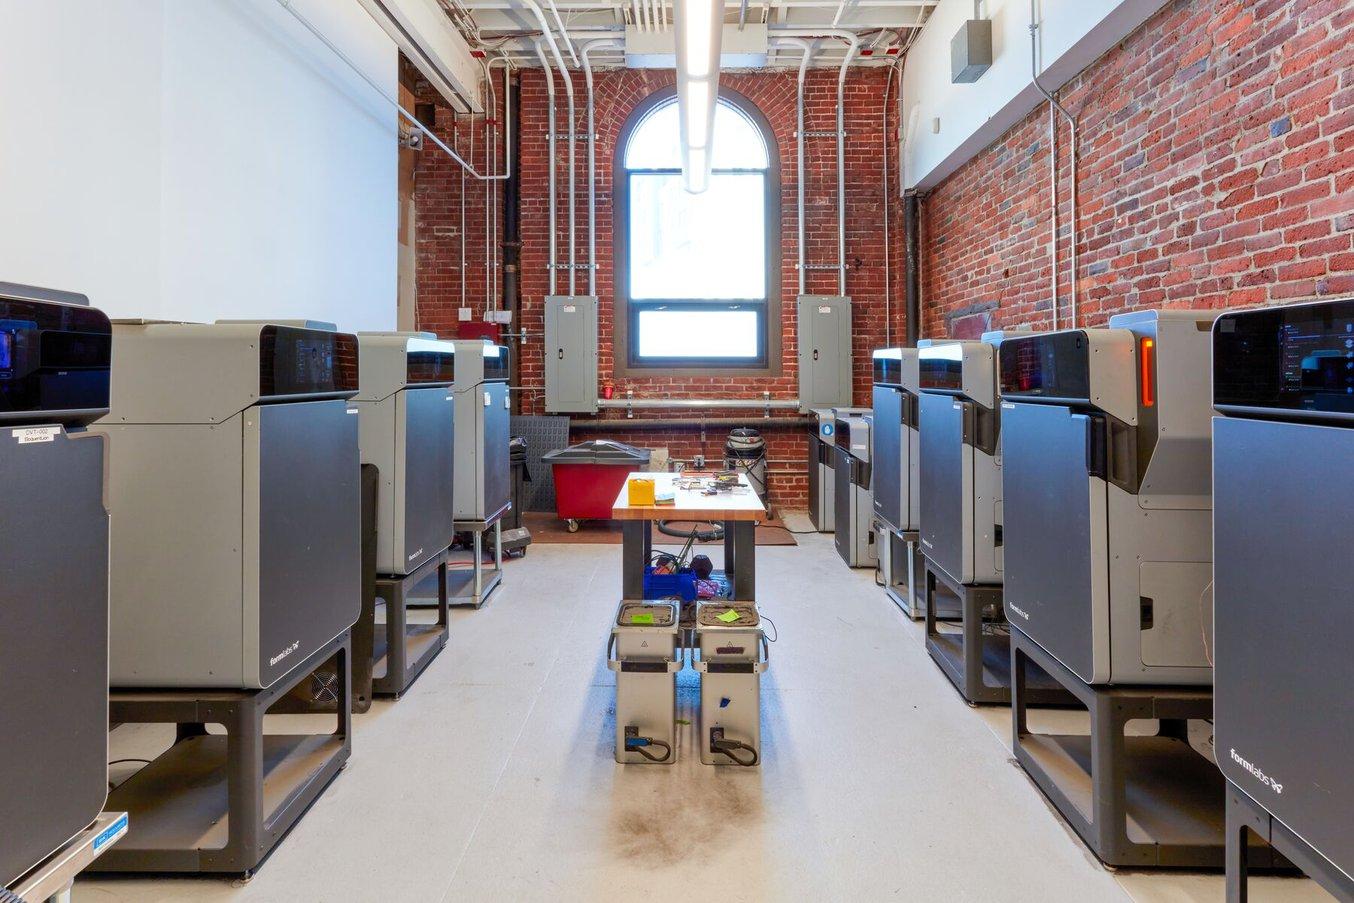 A print farm production setting with multiple Fuse 1 3D printers and Fuse Sift post processing machines.